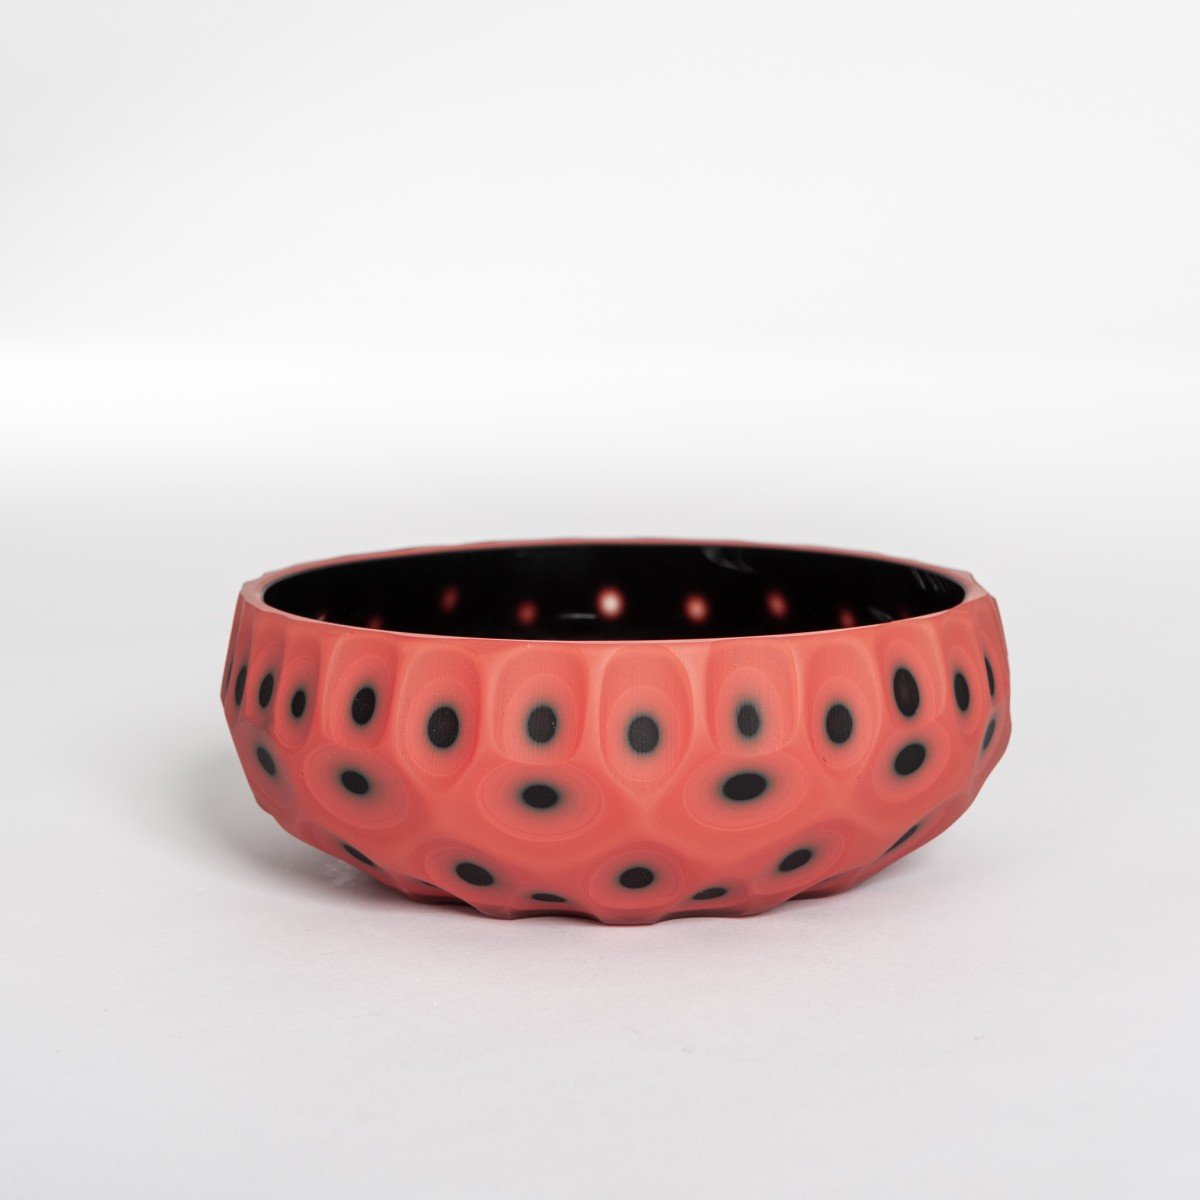 Pair Of Very Decorative Murano Glass Bowls In The Colors Coral-black With Matt Surface And Battuto Decor By Afro Celotto-photo-4